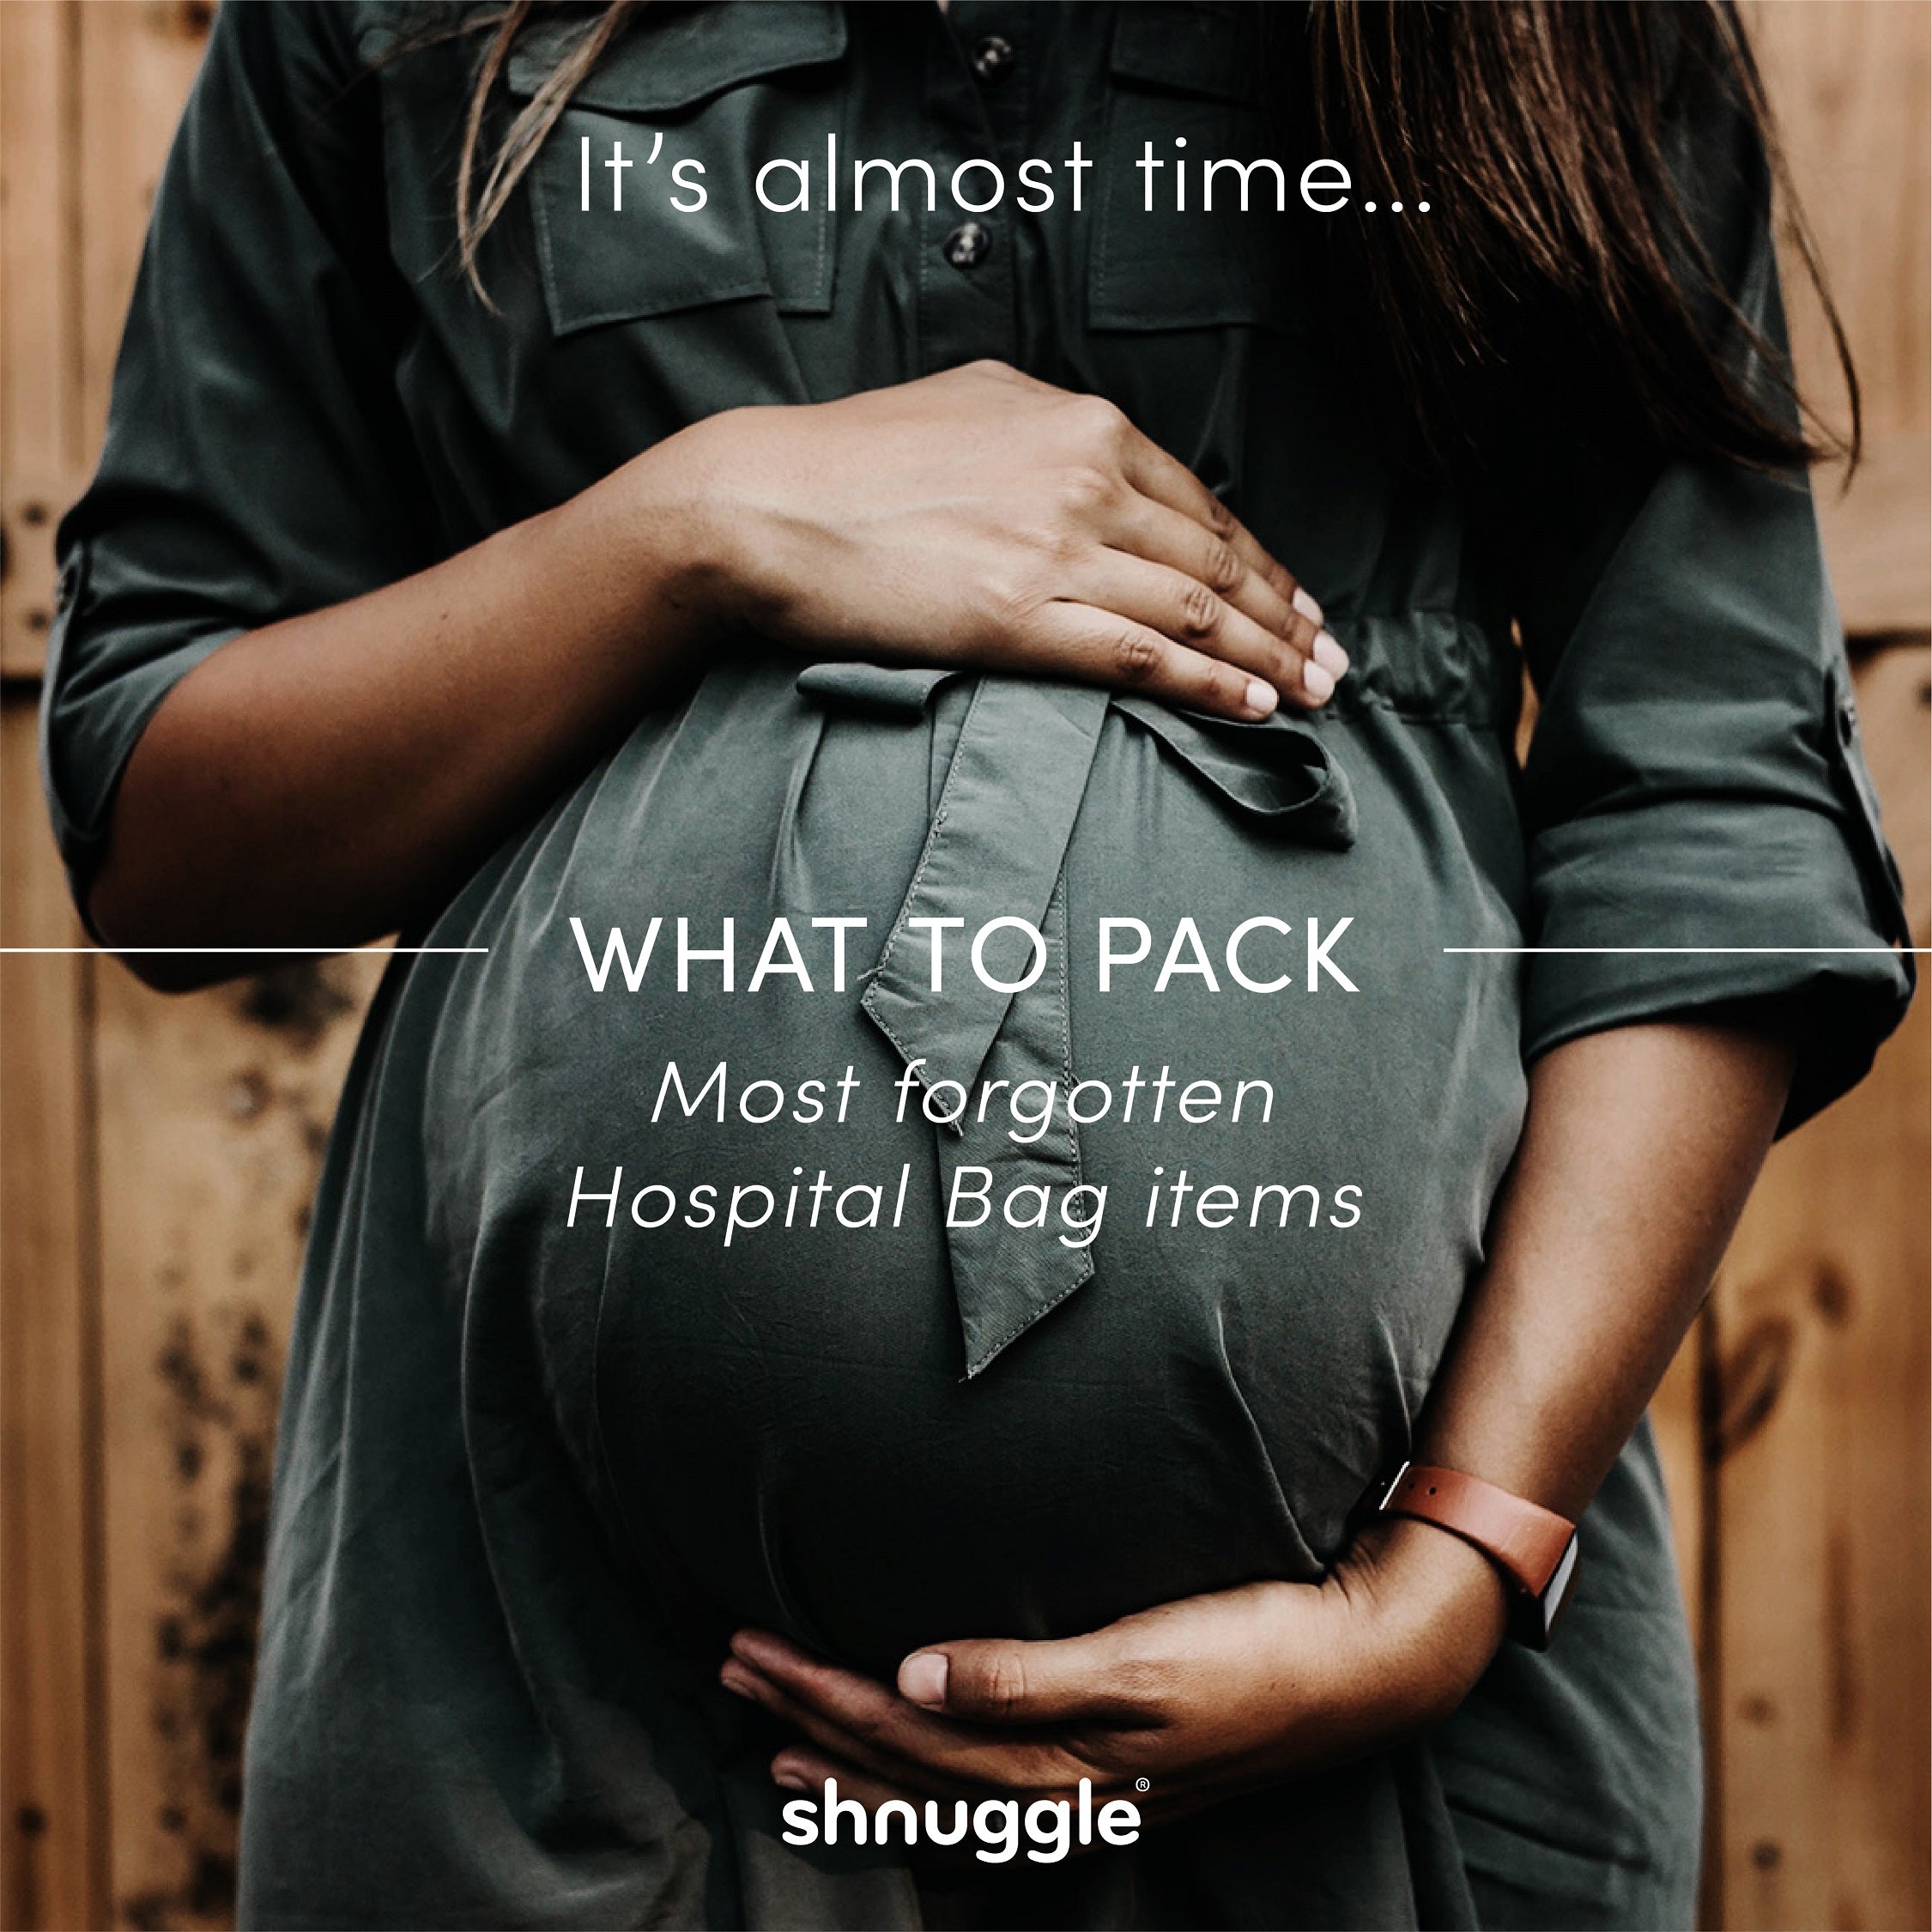 7 Things You're Forgetting in Your Labor and Delivery Hospital Bag